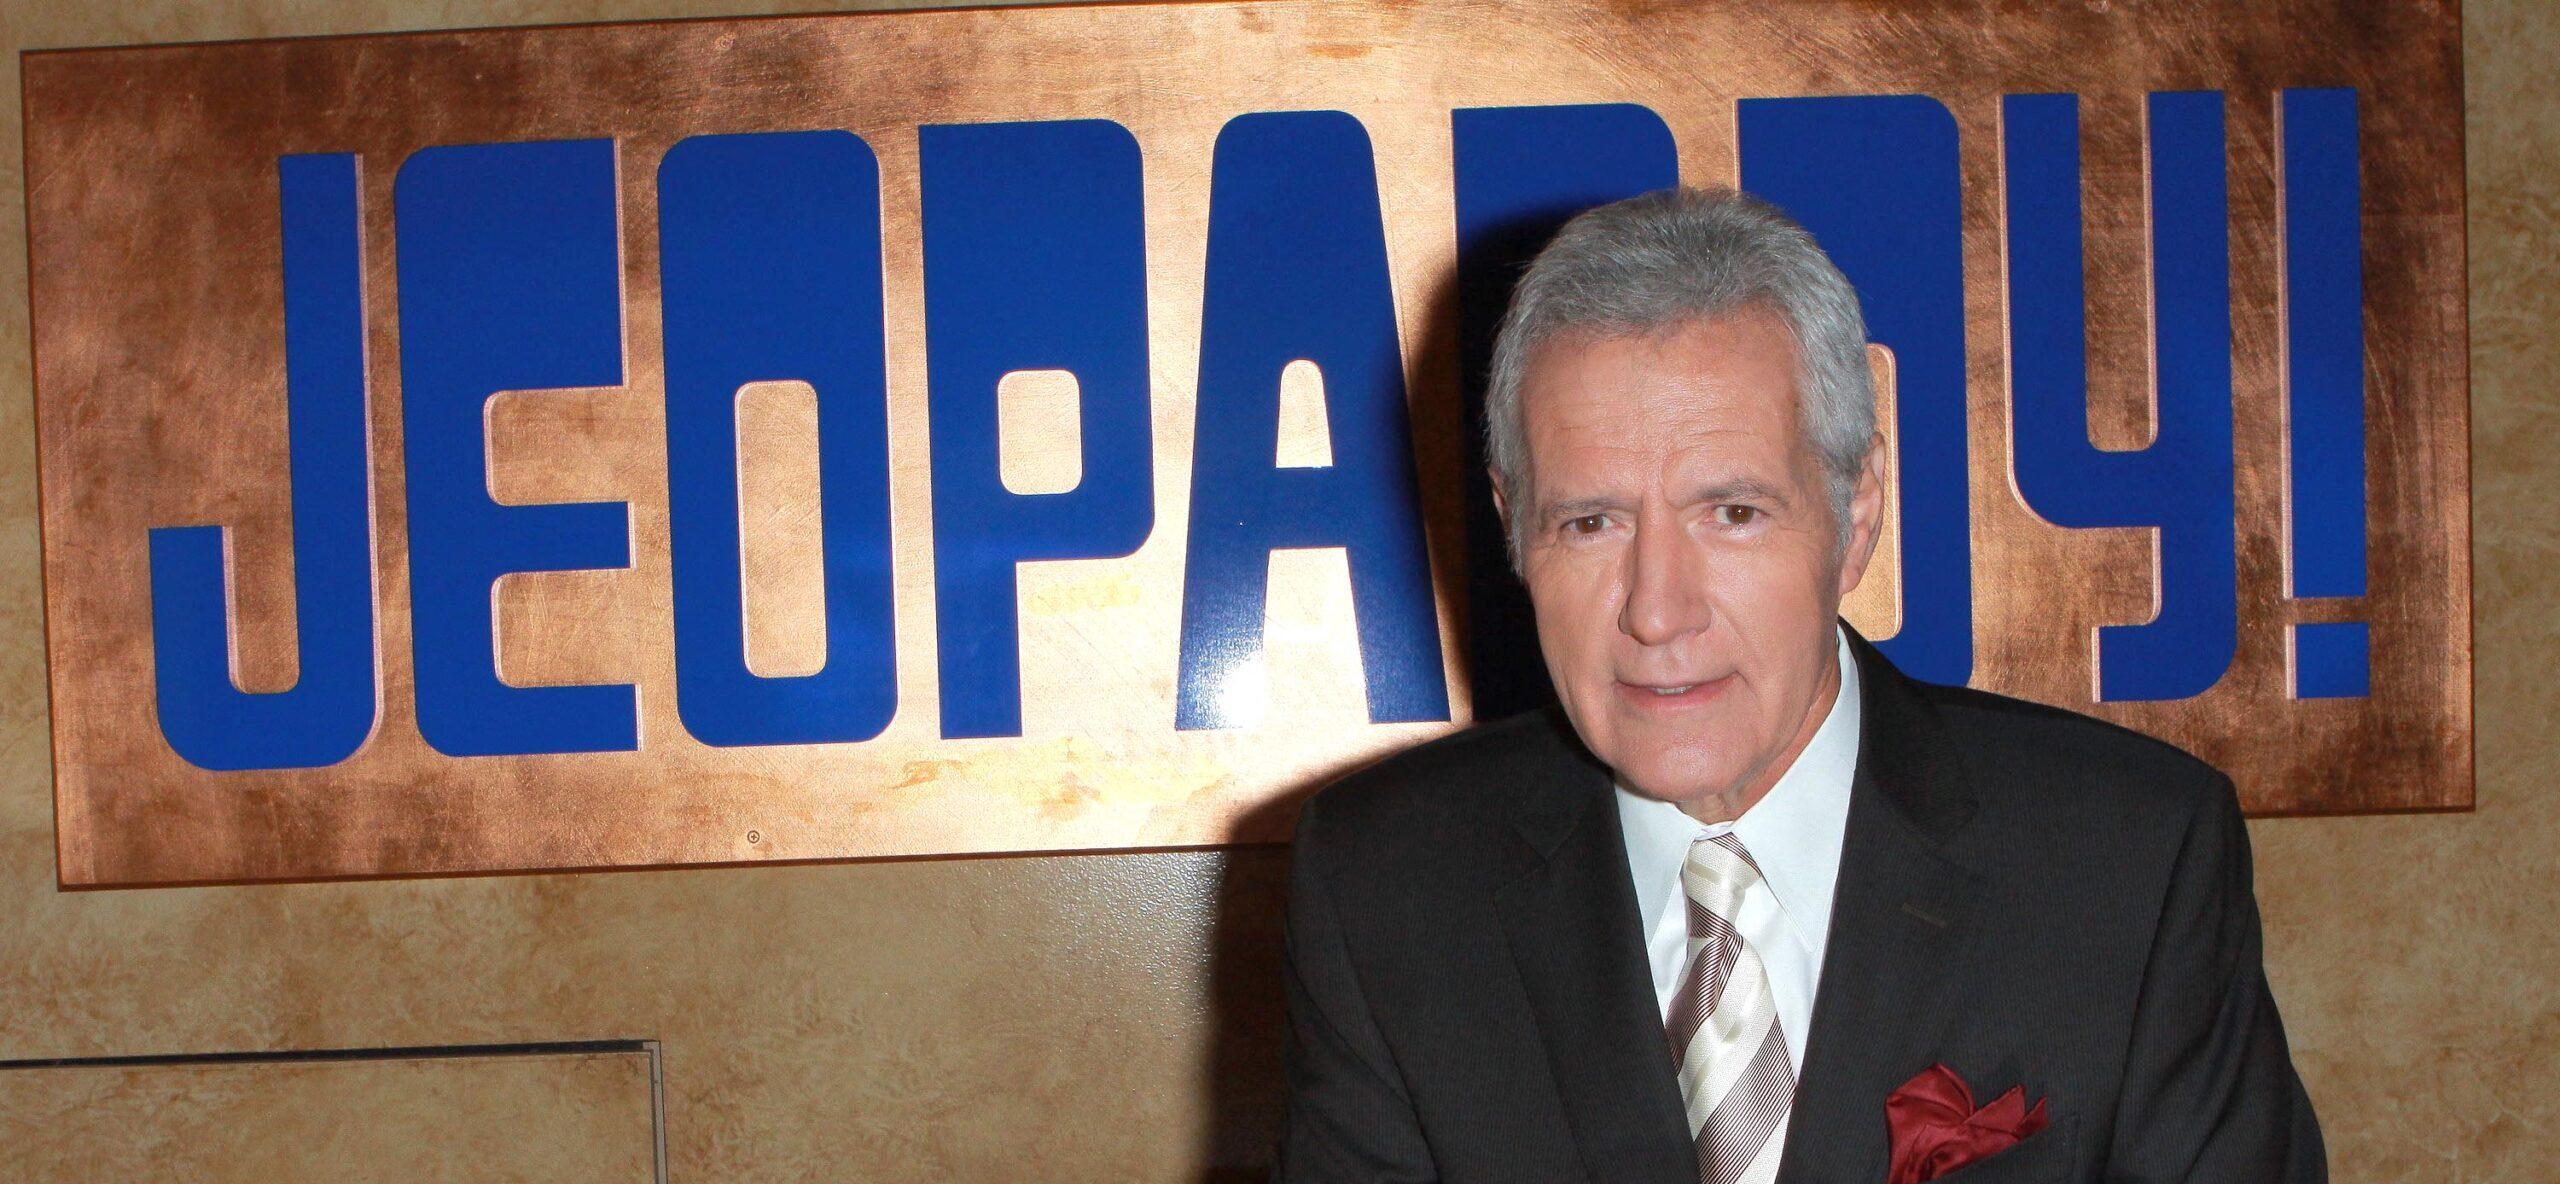 ‘Jeopardy!’ Director Sues Show For $3 Million Alleging Age Discrimination